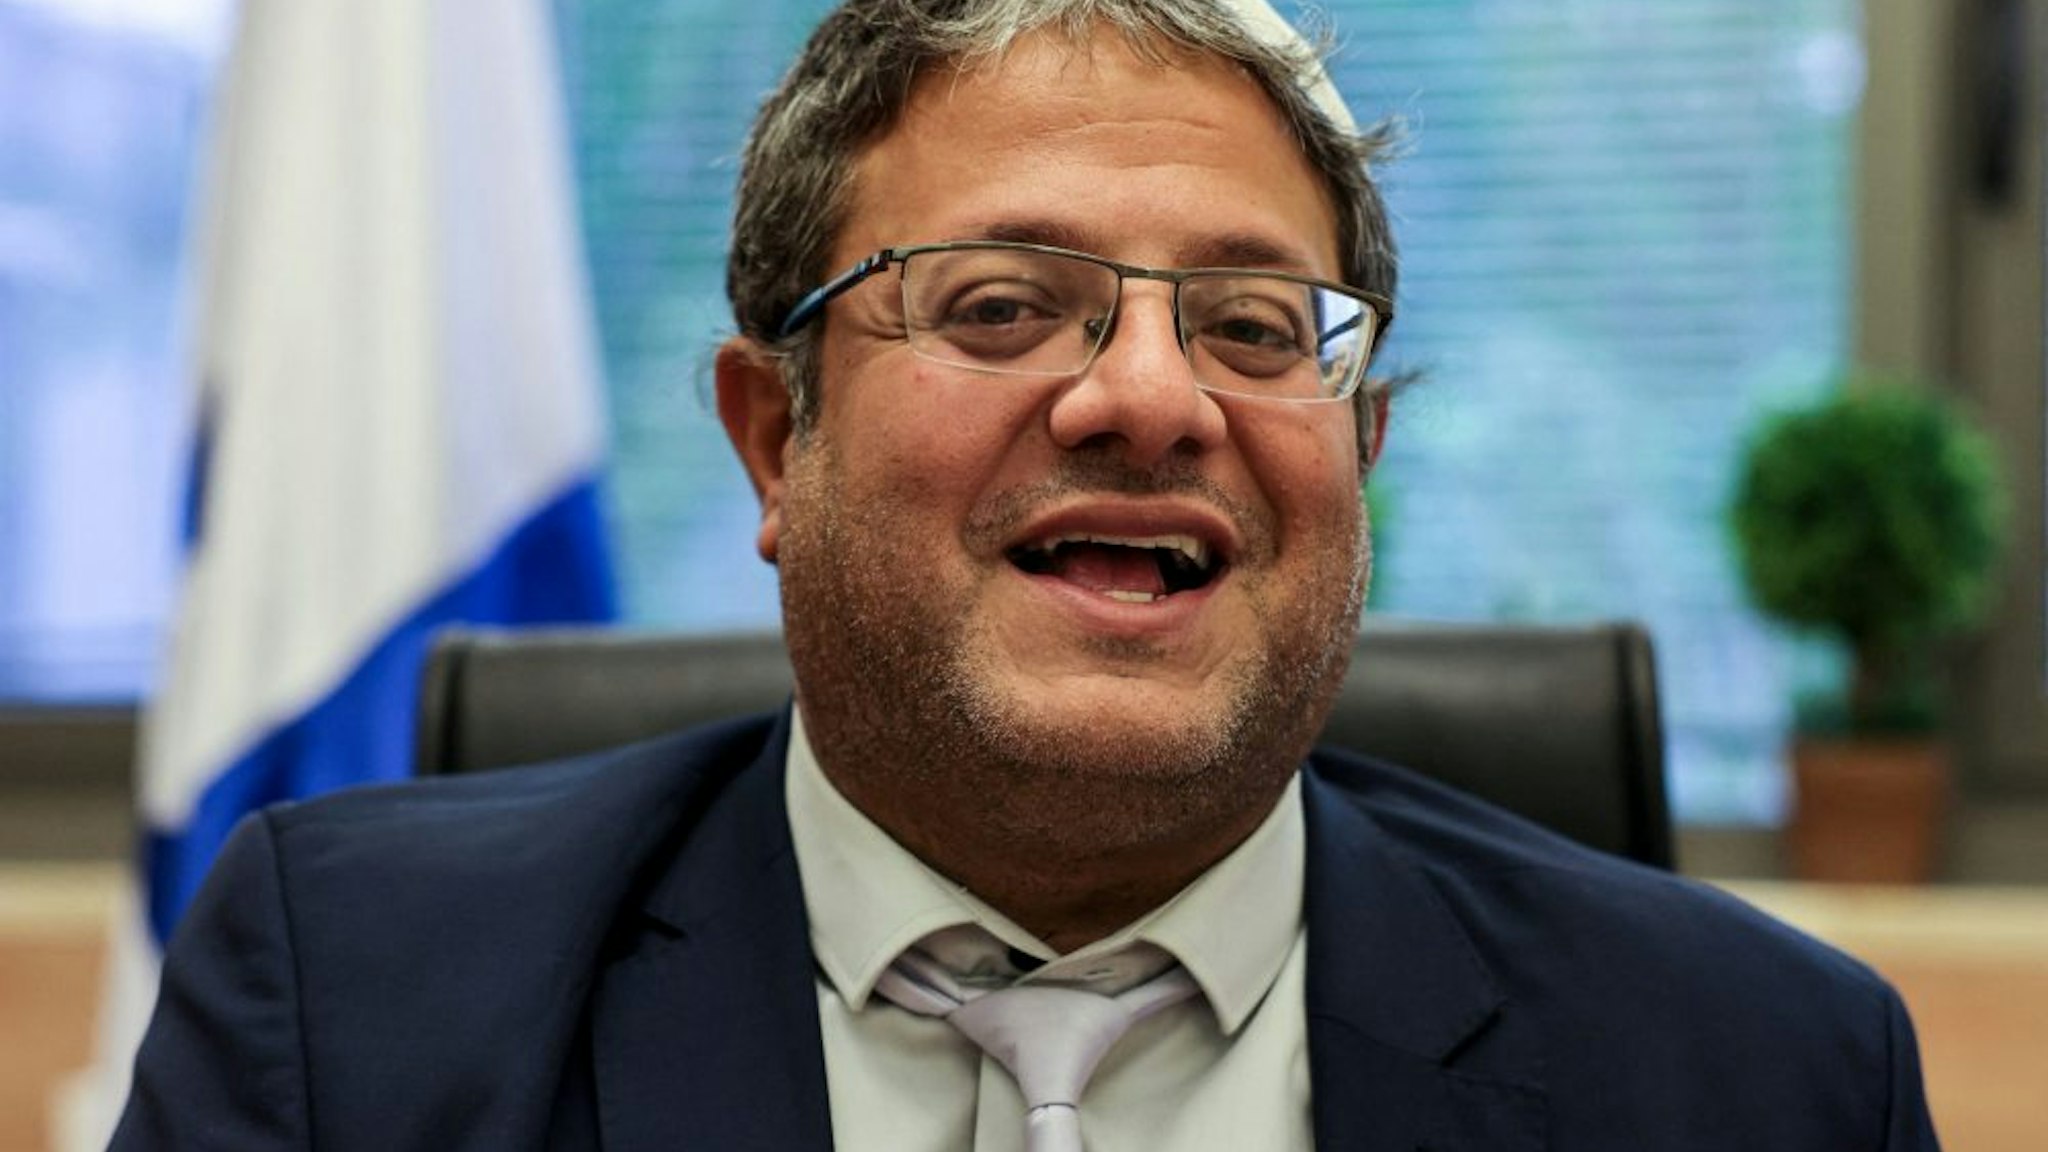 Itamar Ben-Gvir, member of Israel's Knesset (parliament) and head of the one-man far right "Jewish Power" (Otzma Yehudit) party, gives an interview with AFP at his office in the Knesset building in Jerusalem on May 26, 2021. - As Israelis clashed with Palestinians in recent weeks, the hardline nationalist lawmaker allied with embattled Prime Minister Benjamin Netanyahu was repeatedly stoking the flames. The 45-year-old lawyer and father of six, who lives in a settlement near Hebron in the Israel-occupied West Bank, took his seat in the Knesset in April as part of a "Religious Zionism" alliance orchestrated by Netanyahu.